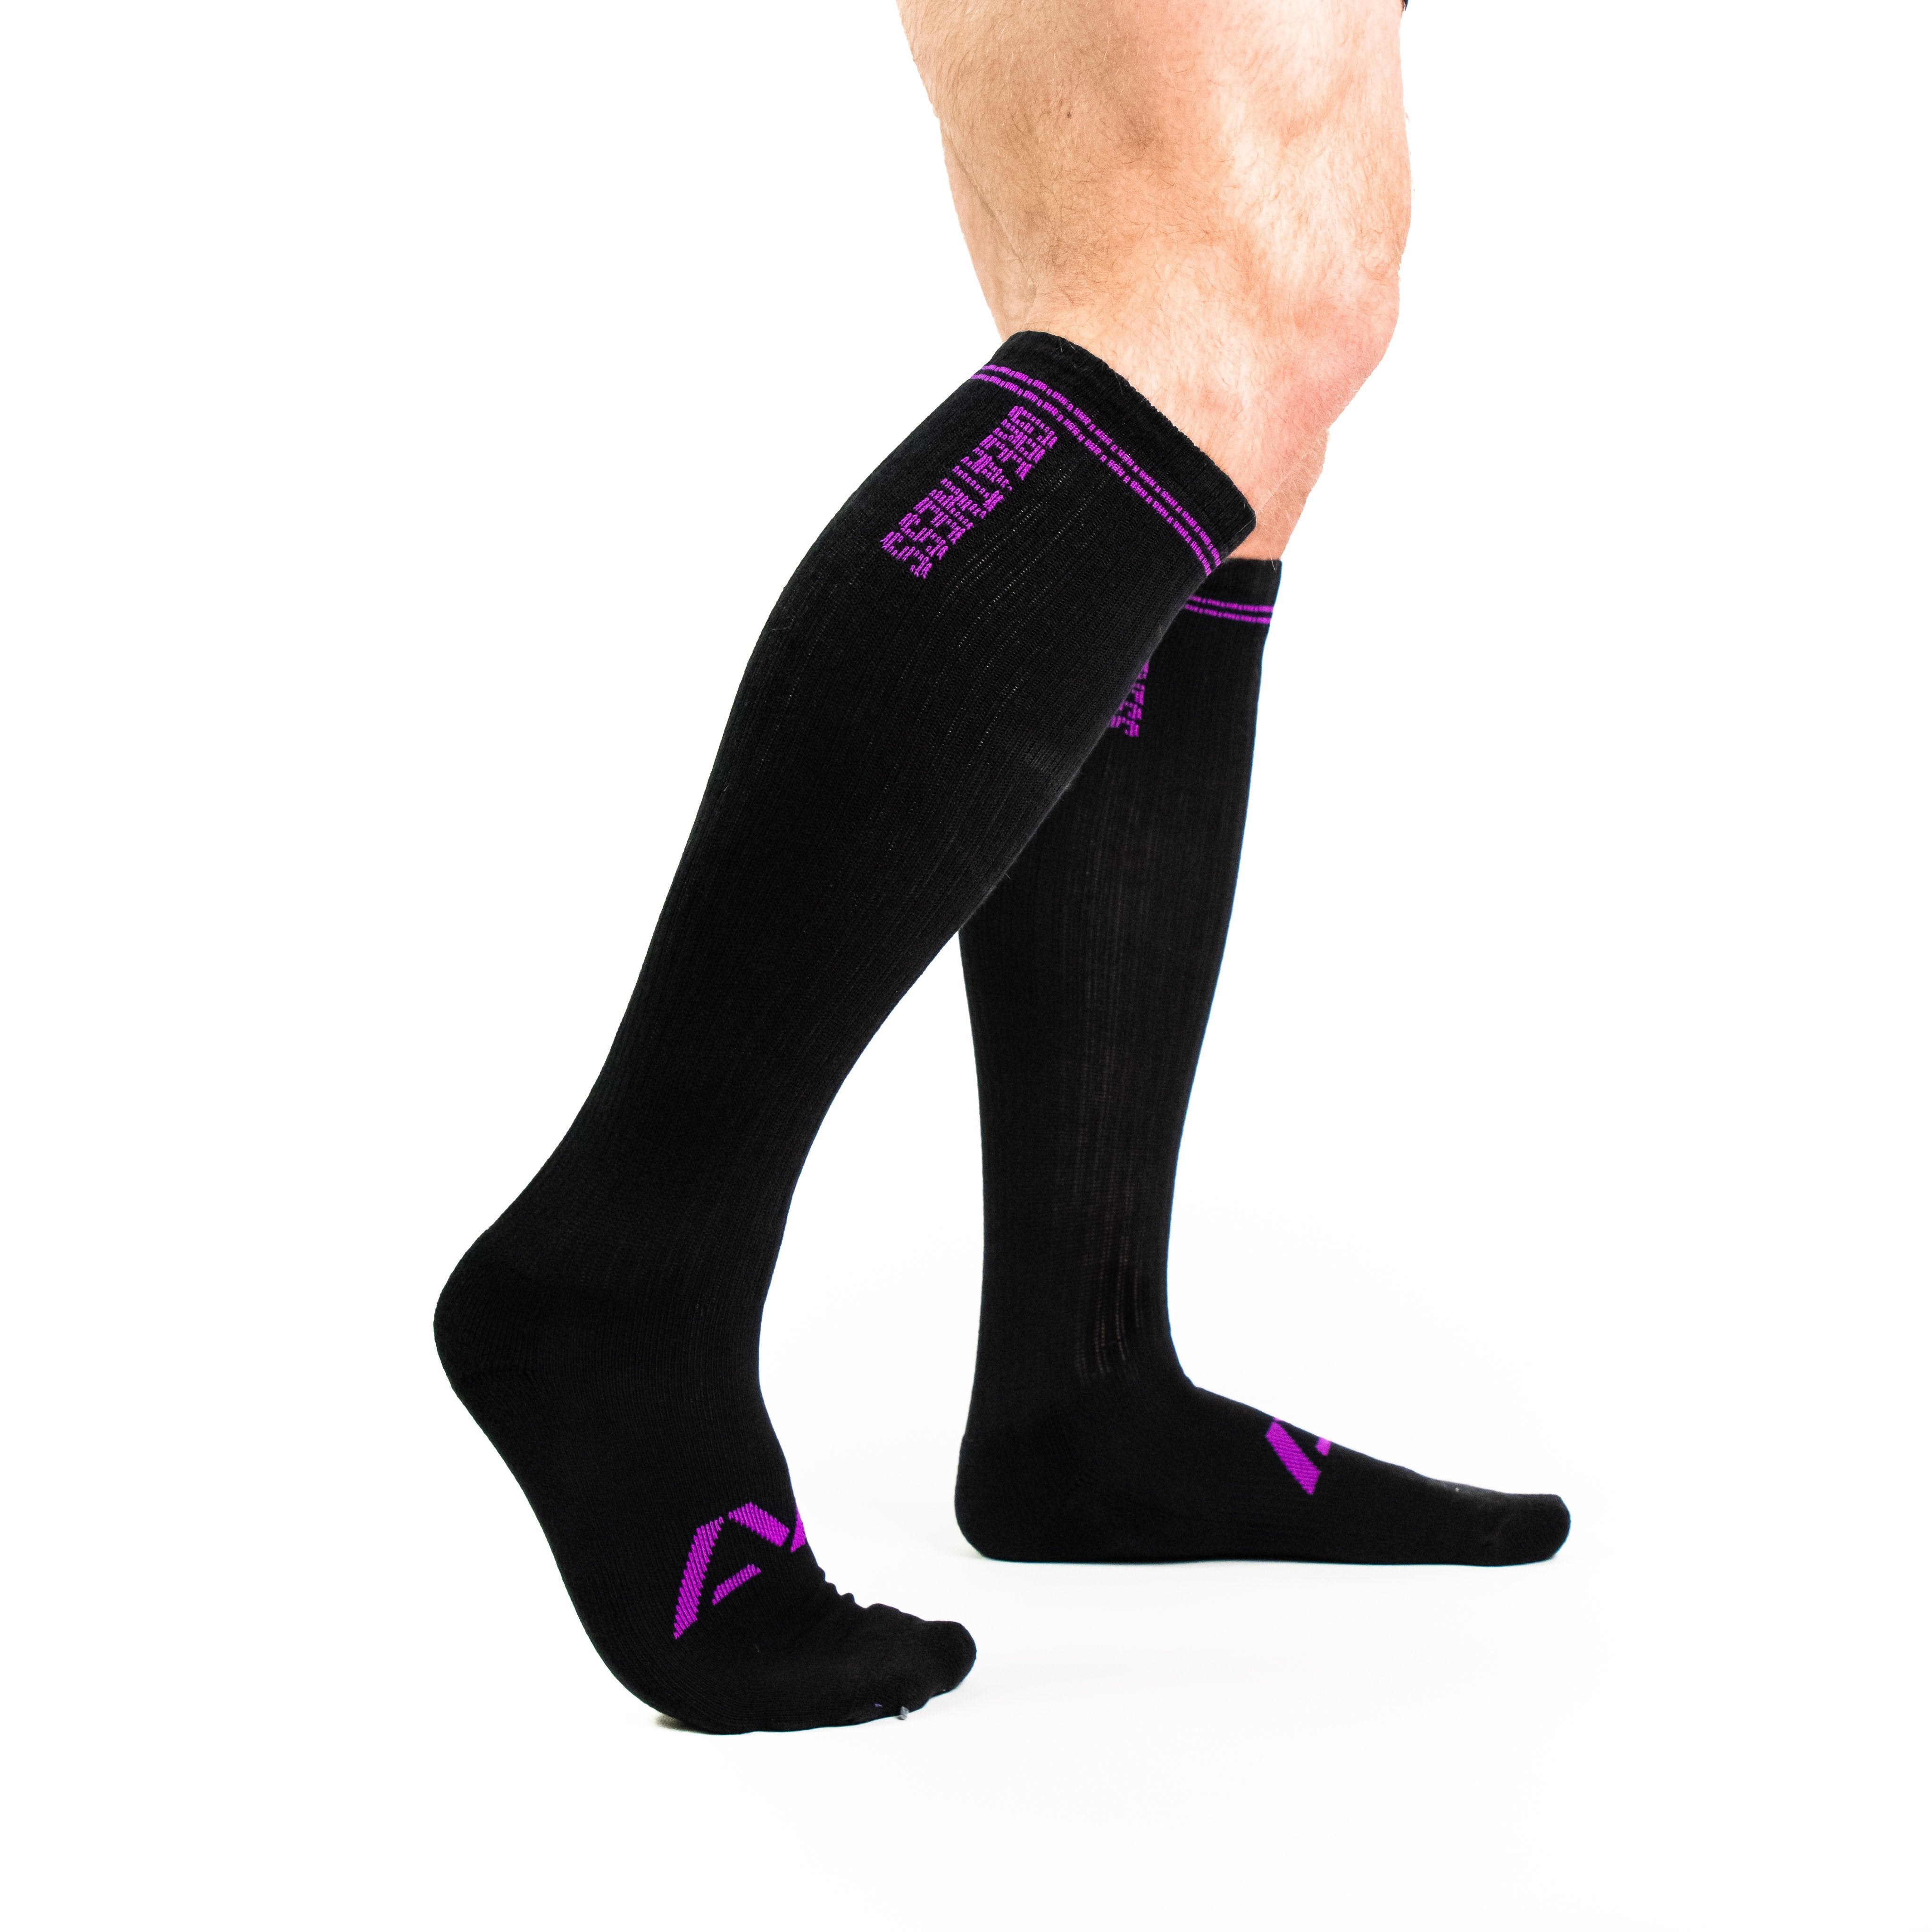 Standout from the crowd in our Purple Deadlift socks and let your energy show on the platform, in your training or while out and about.